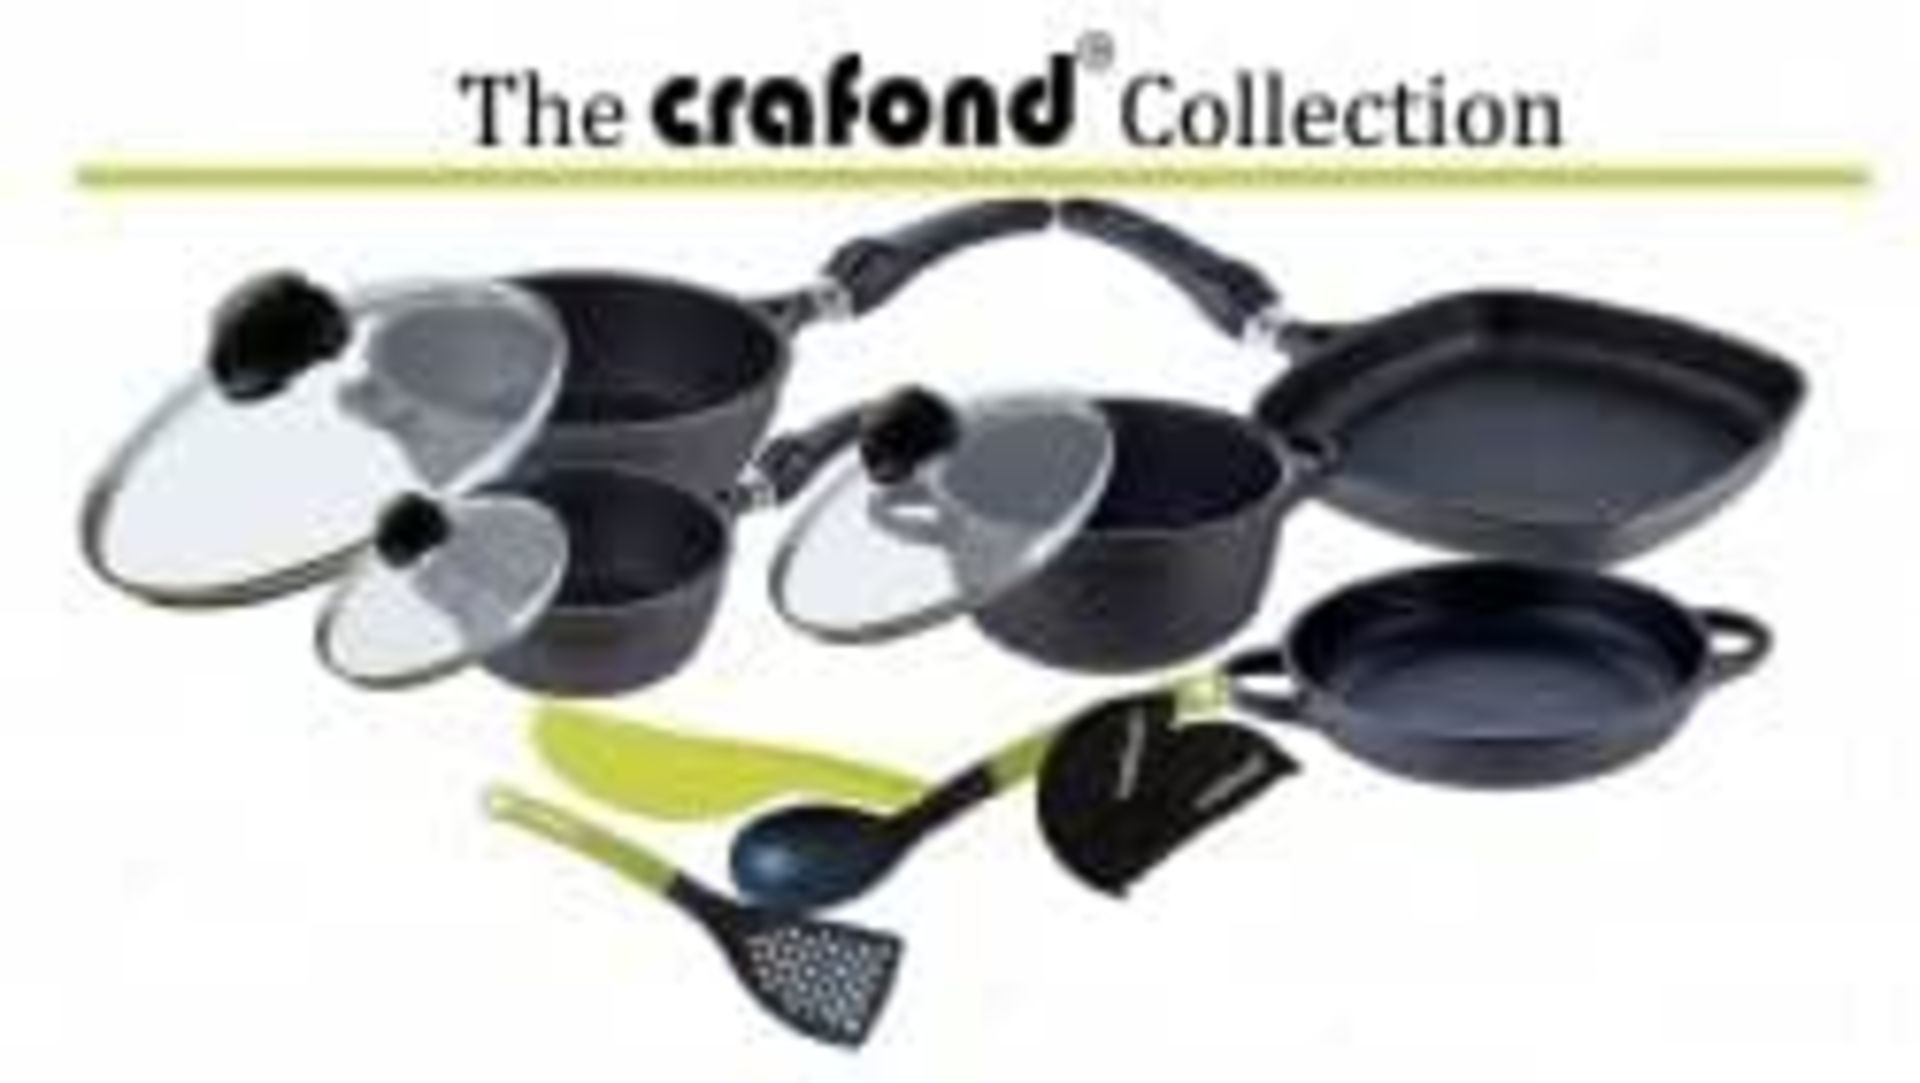 Crafond 28cm Frying Pan with lid and detachable handle. - Image 3 of 3